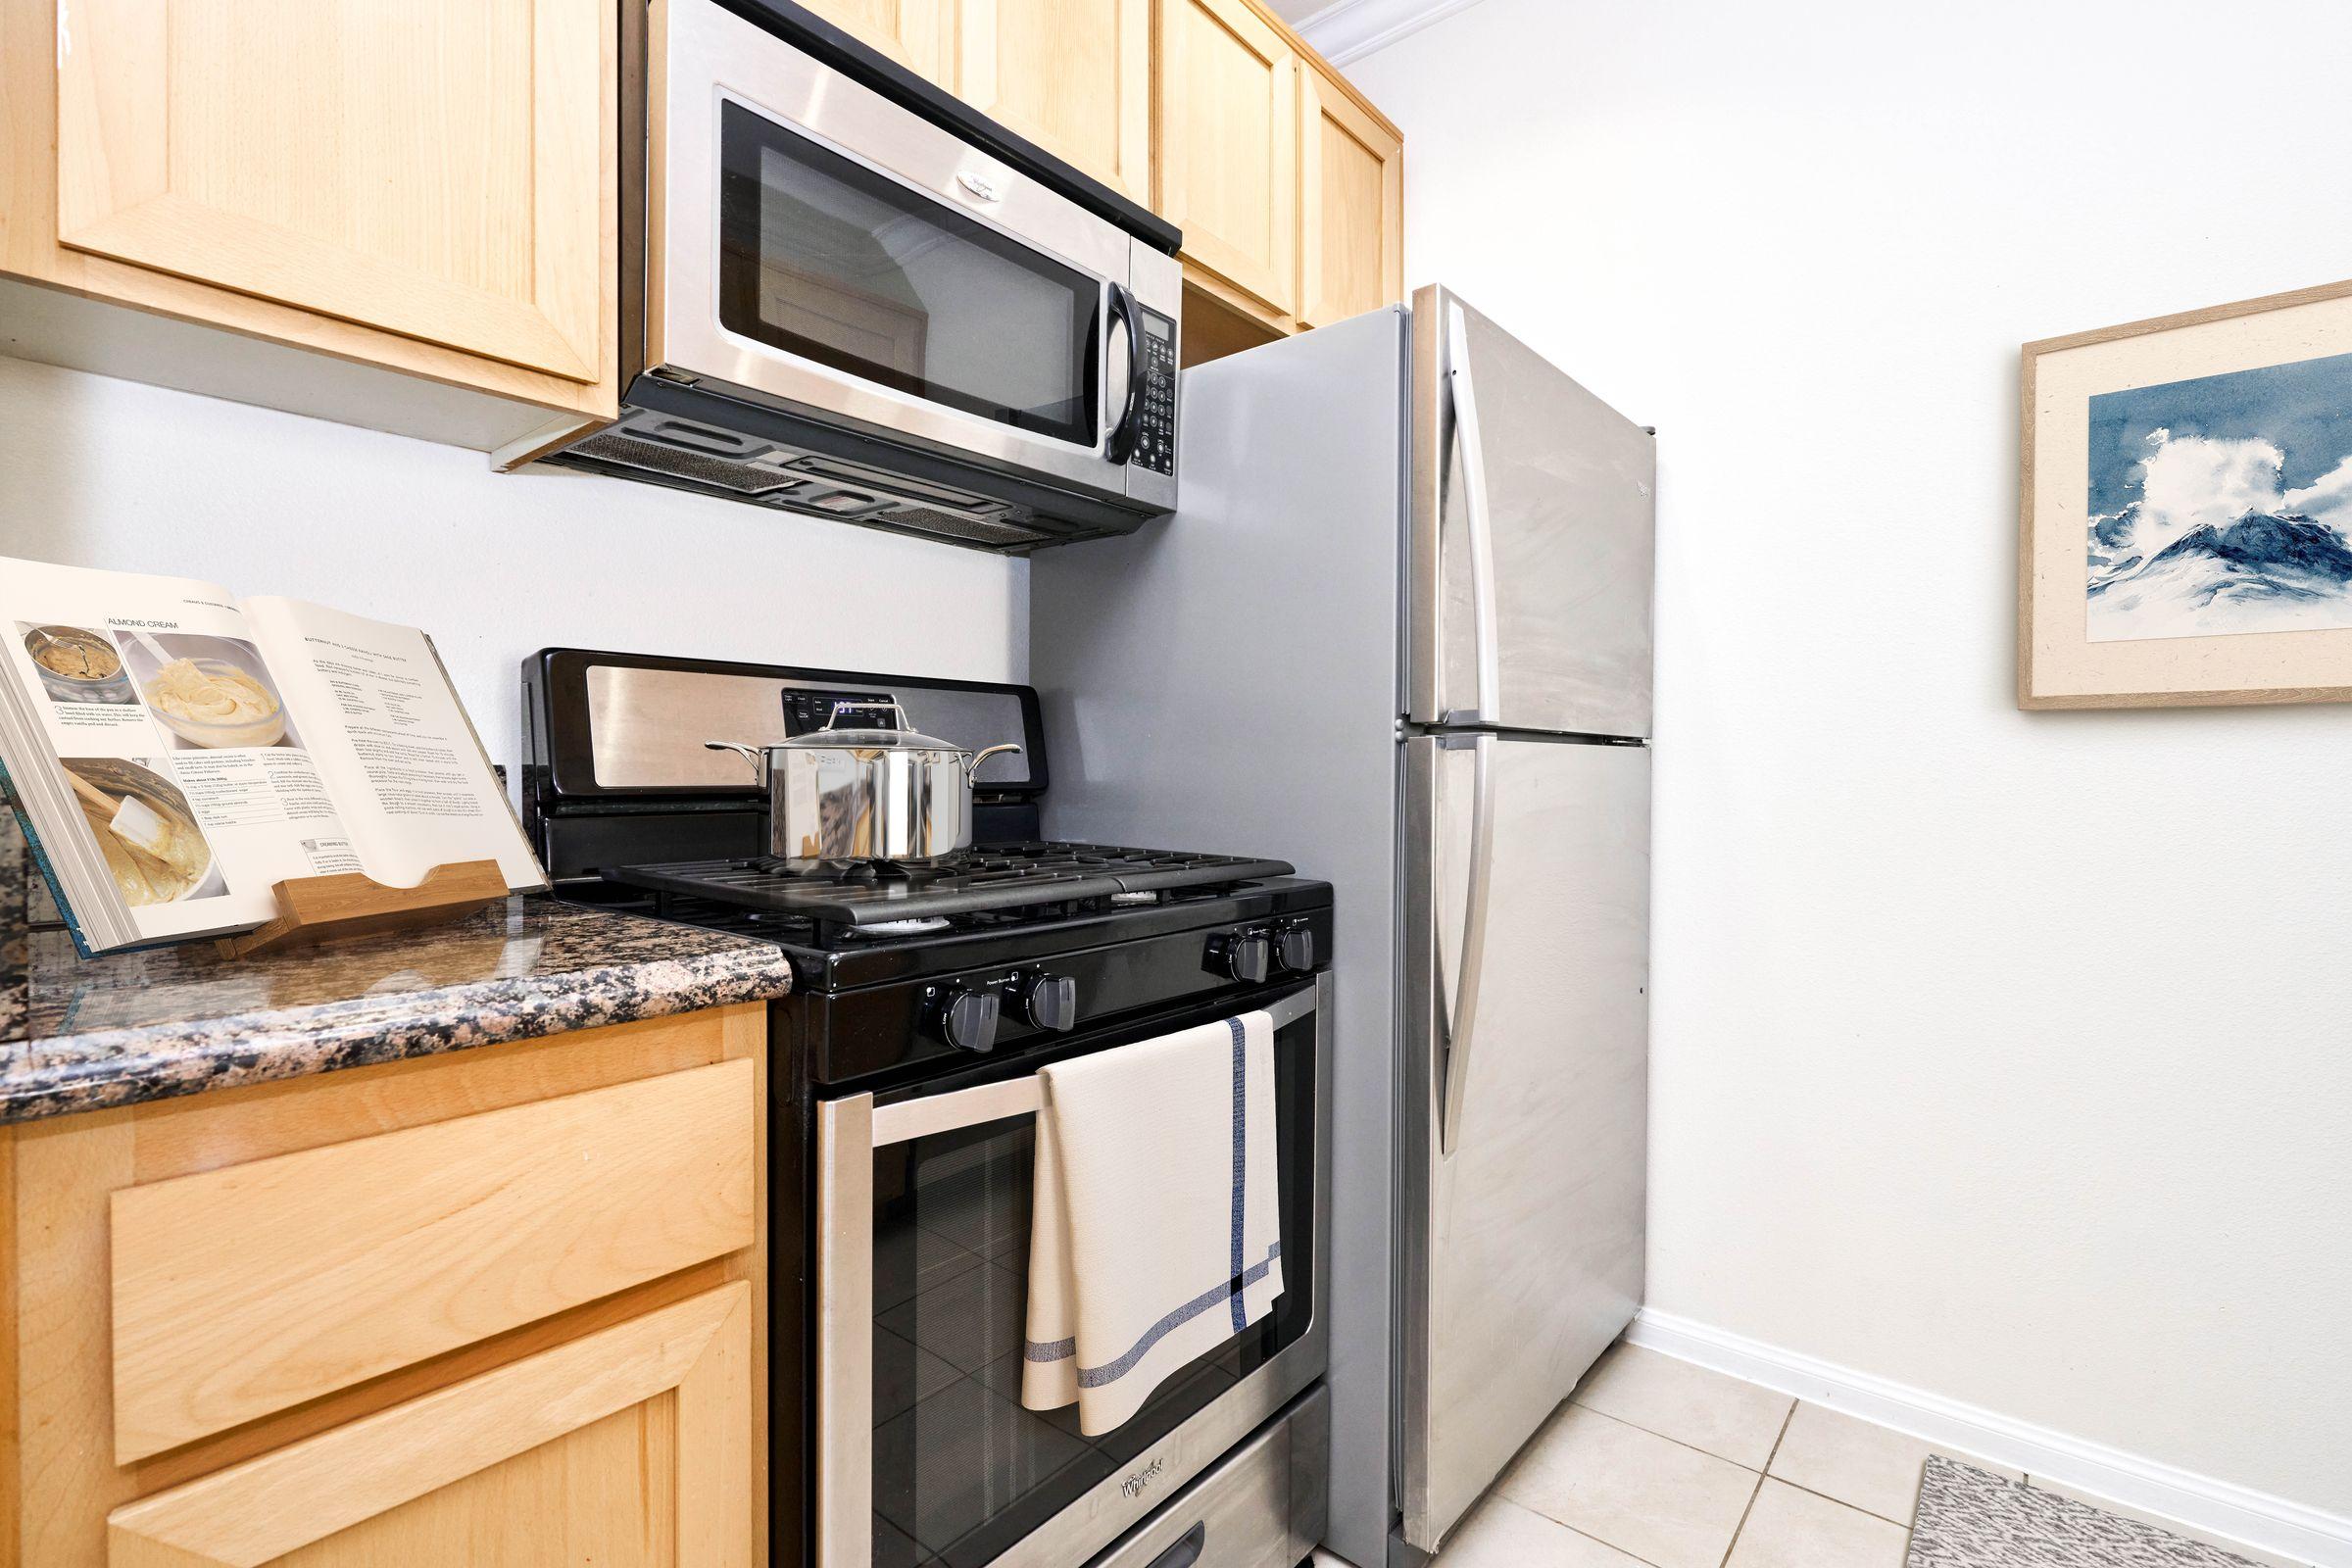 stainless steel appliances in the kitchen